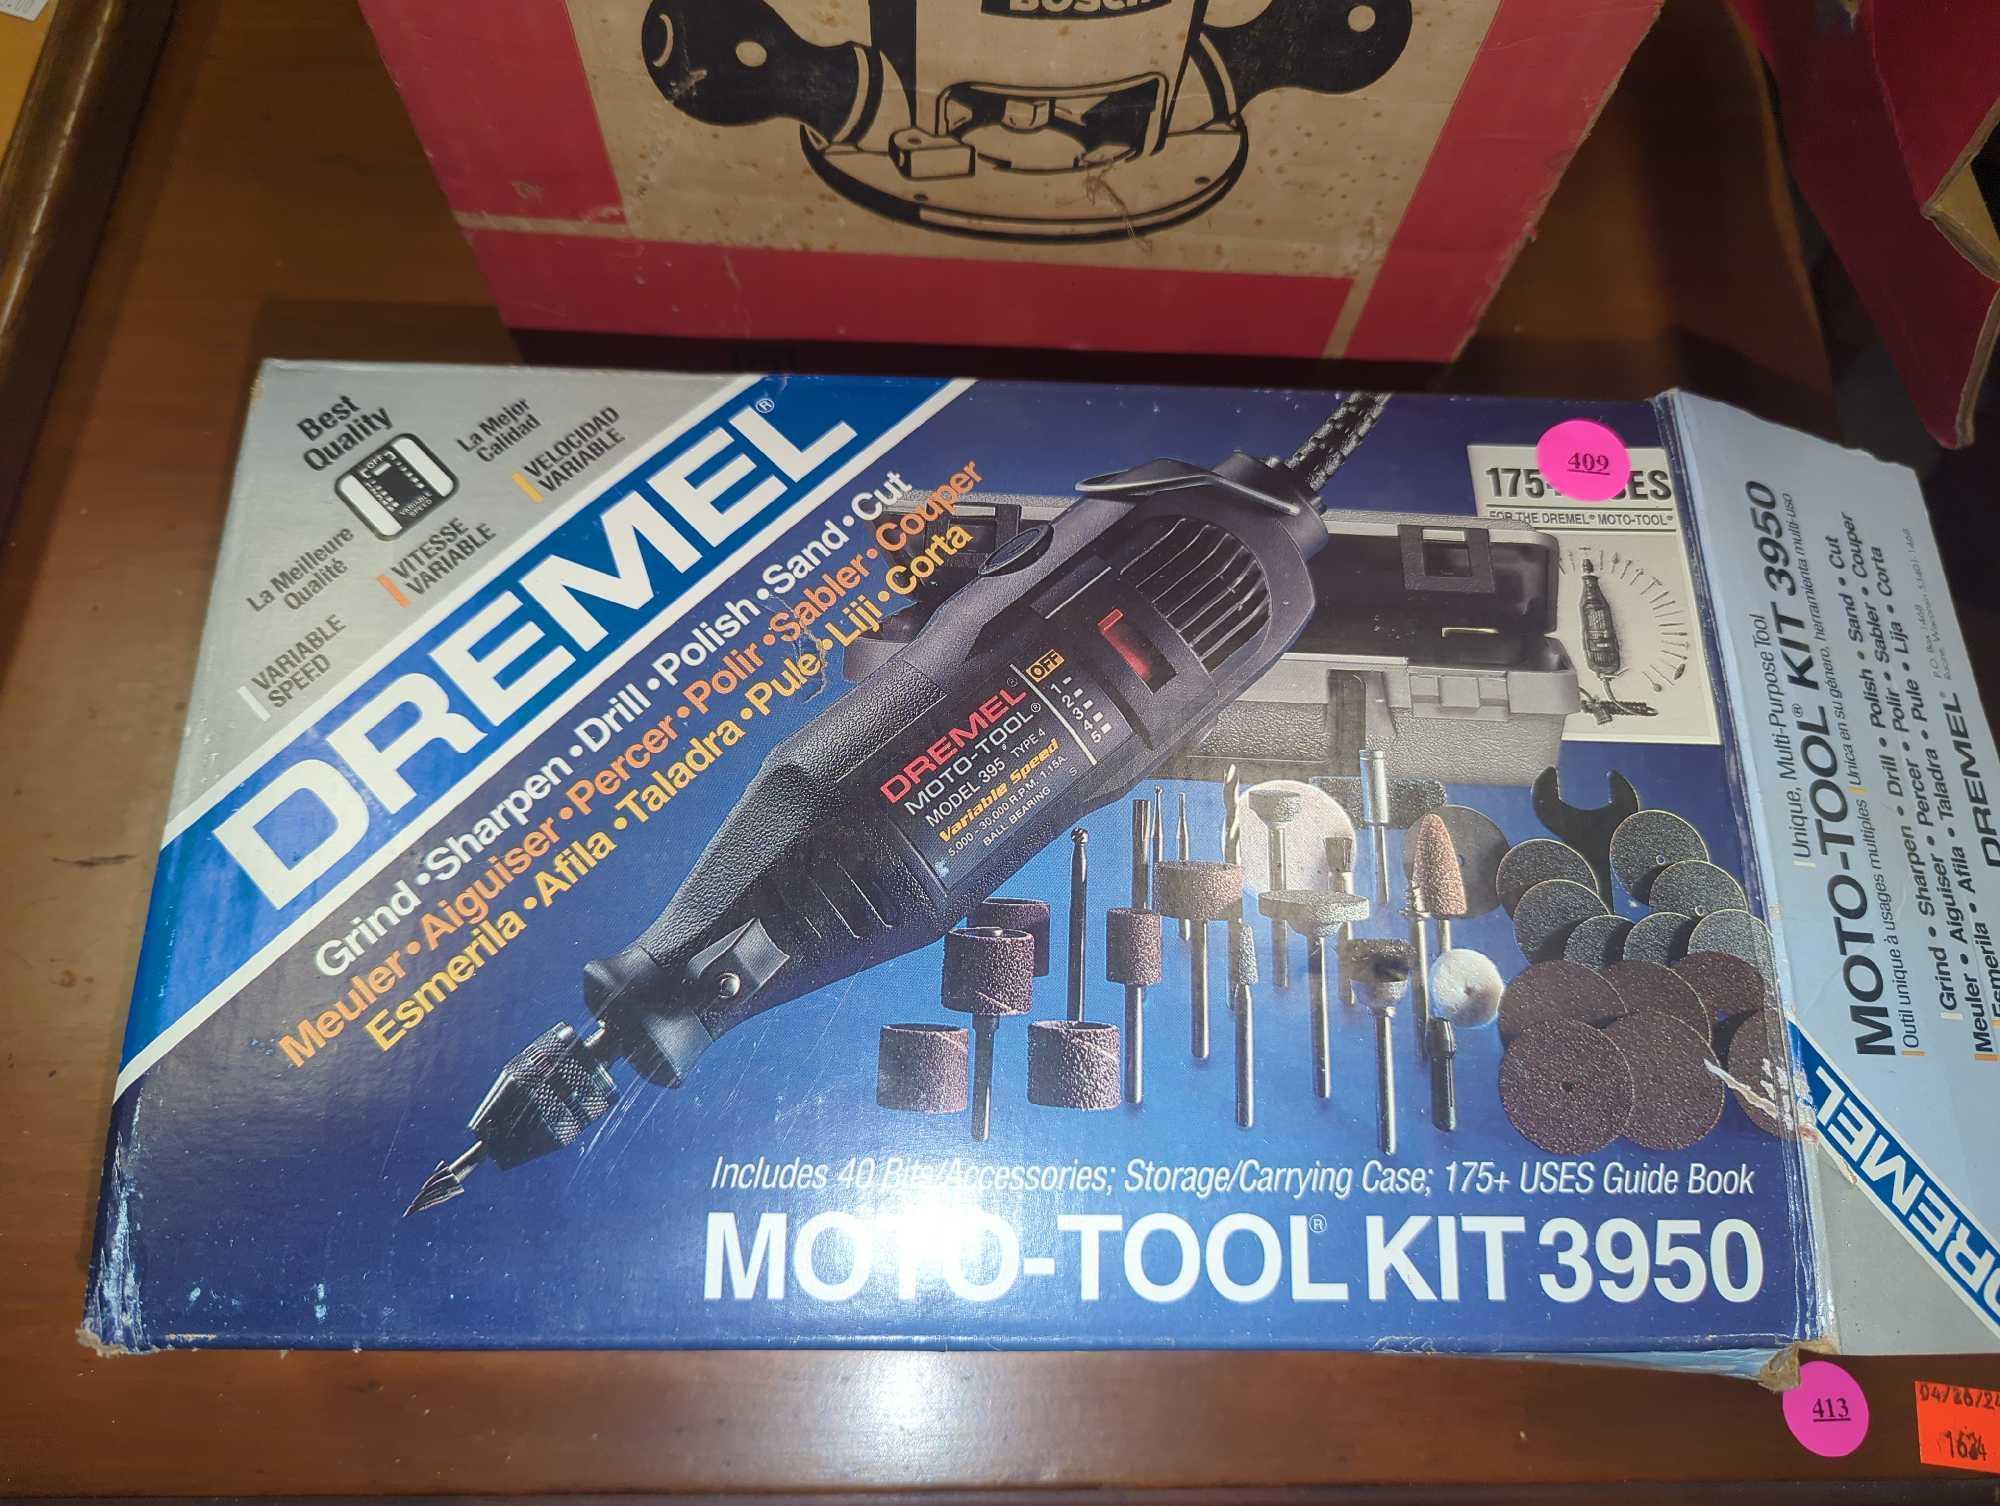 Dremel Moto-Tool with Variable Speed Control, Model 395, Type 4, Comes with Some Bit Attachments,